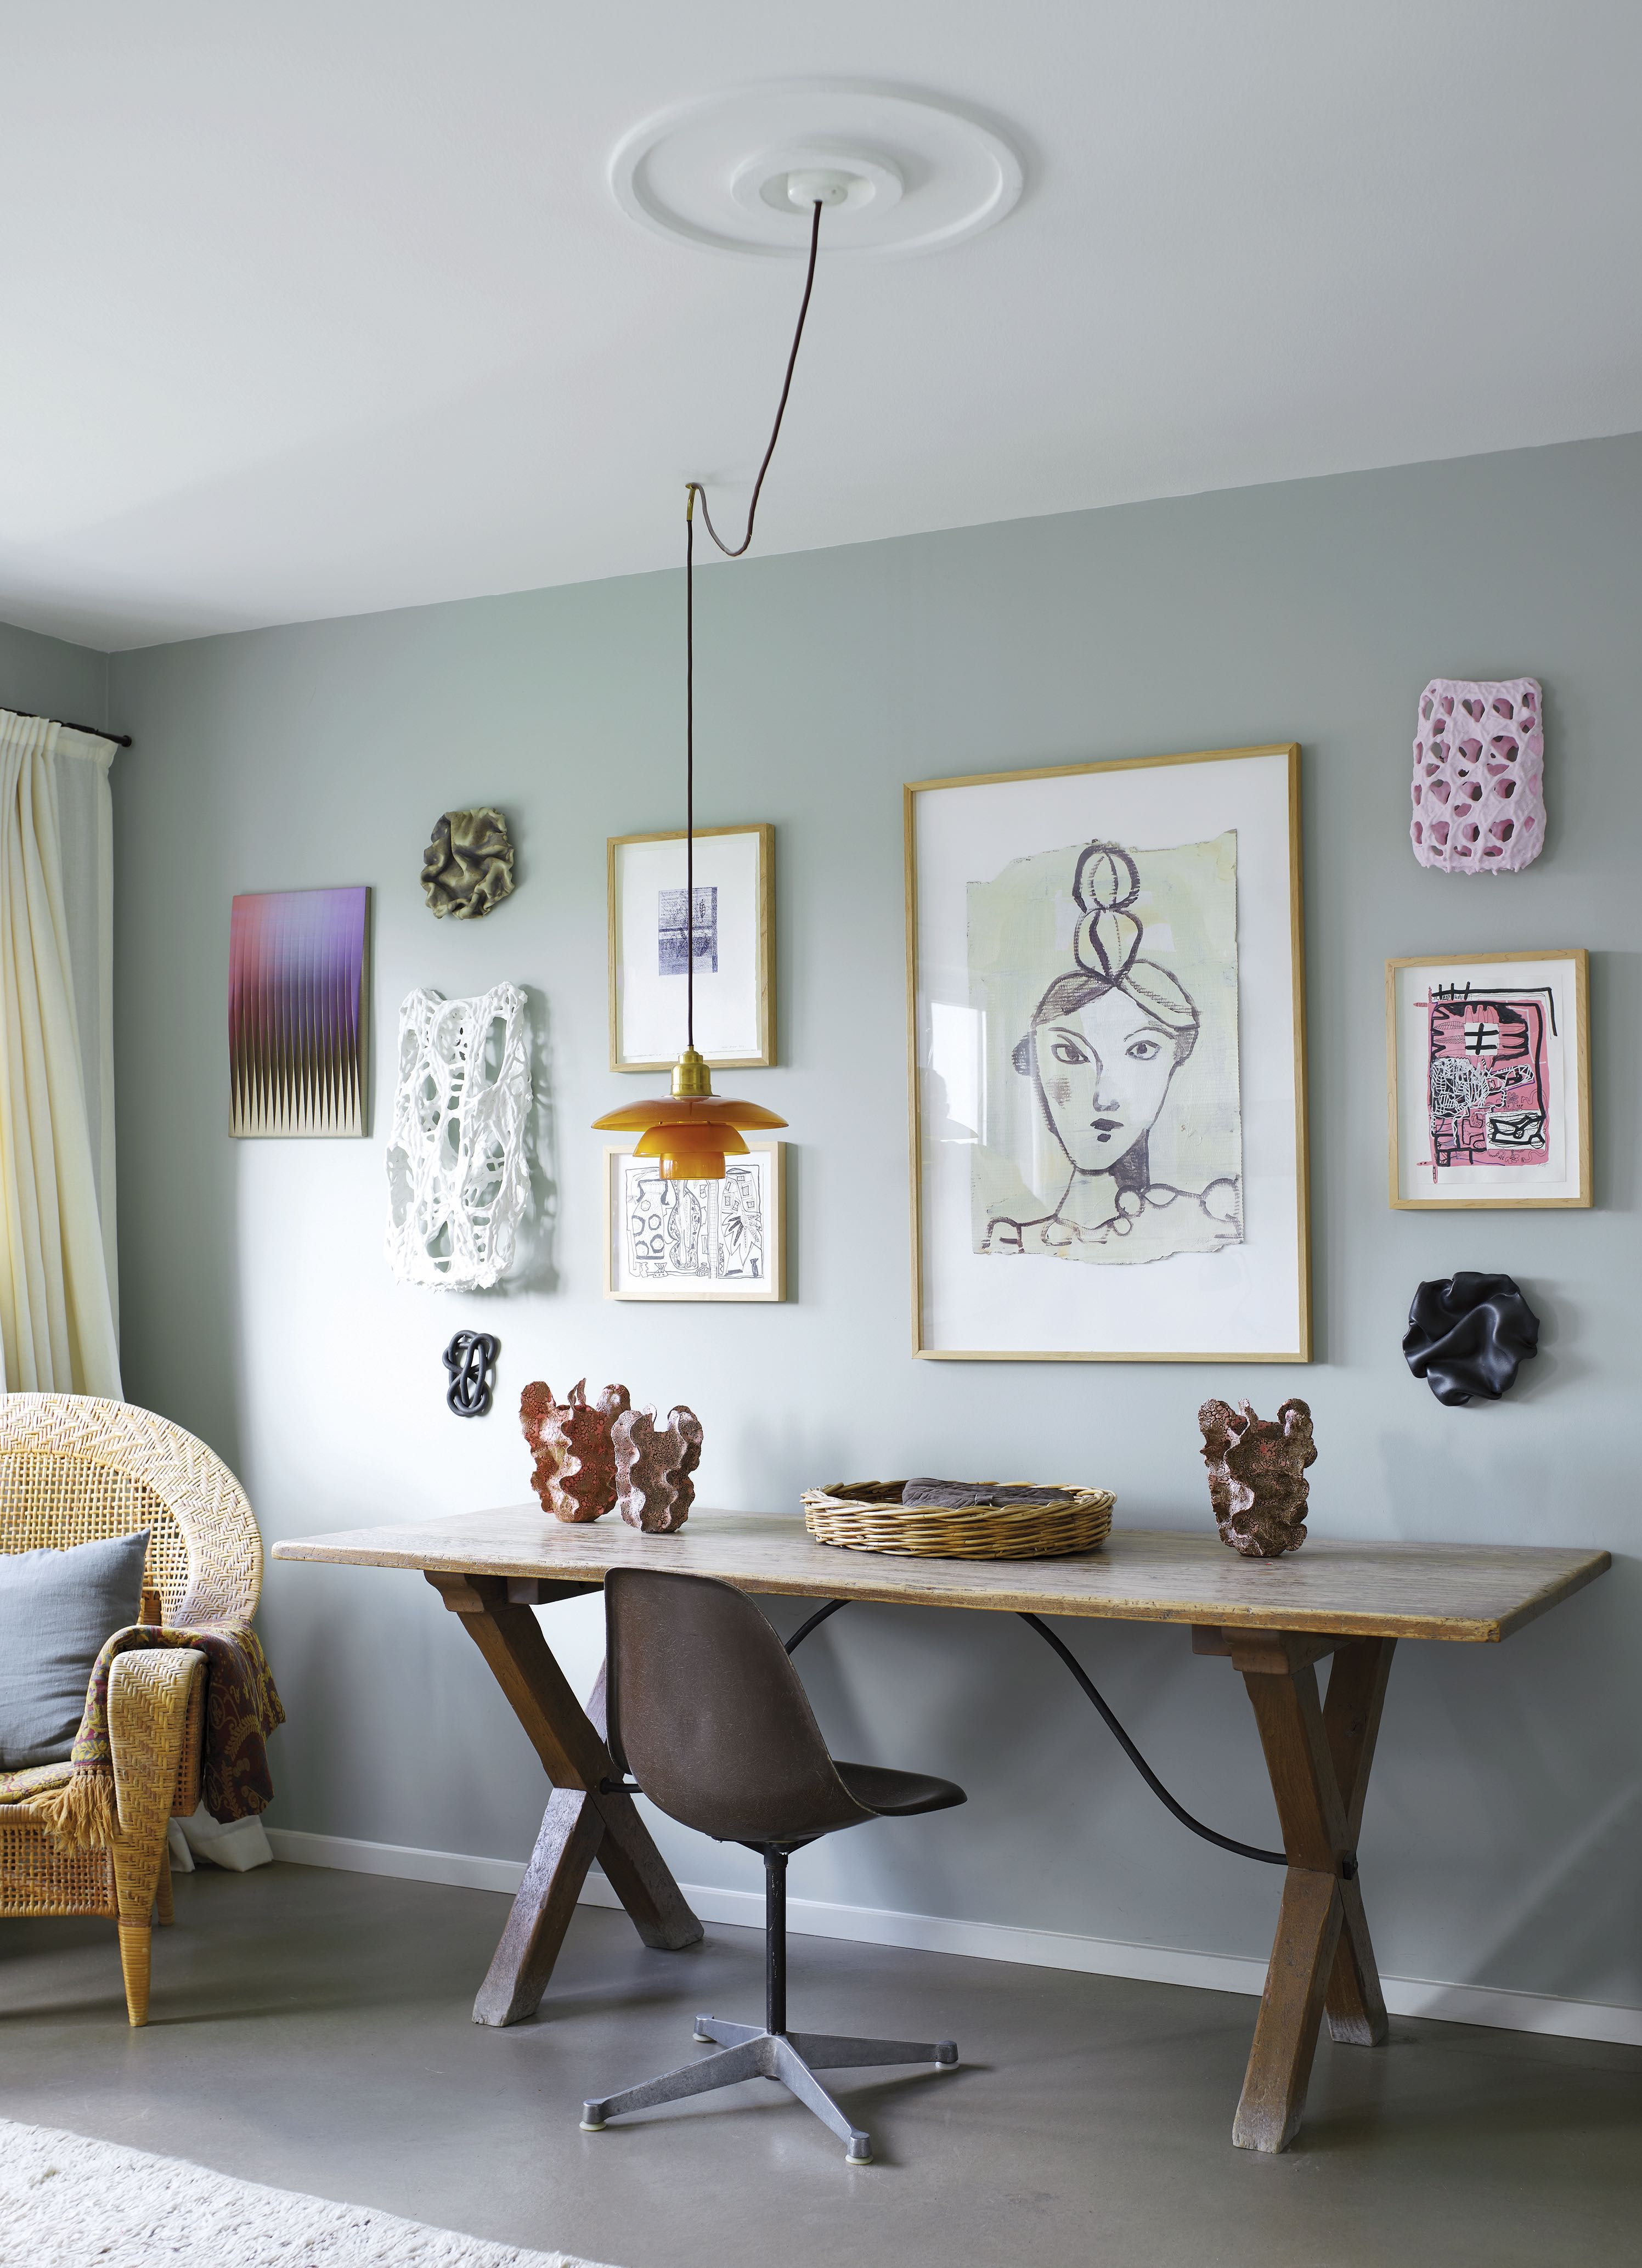 8 rules for decorating with Farrow & Ball's new paint palette